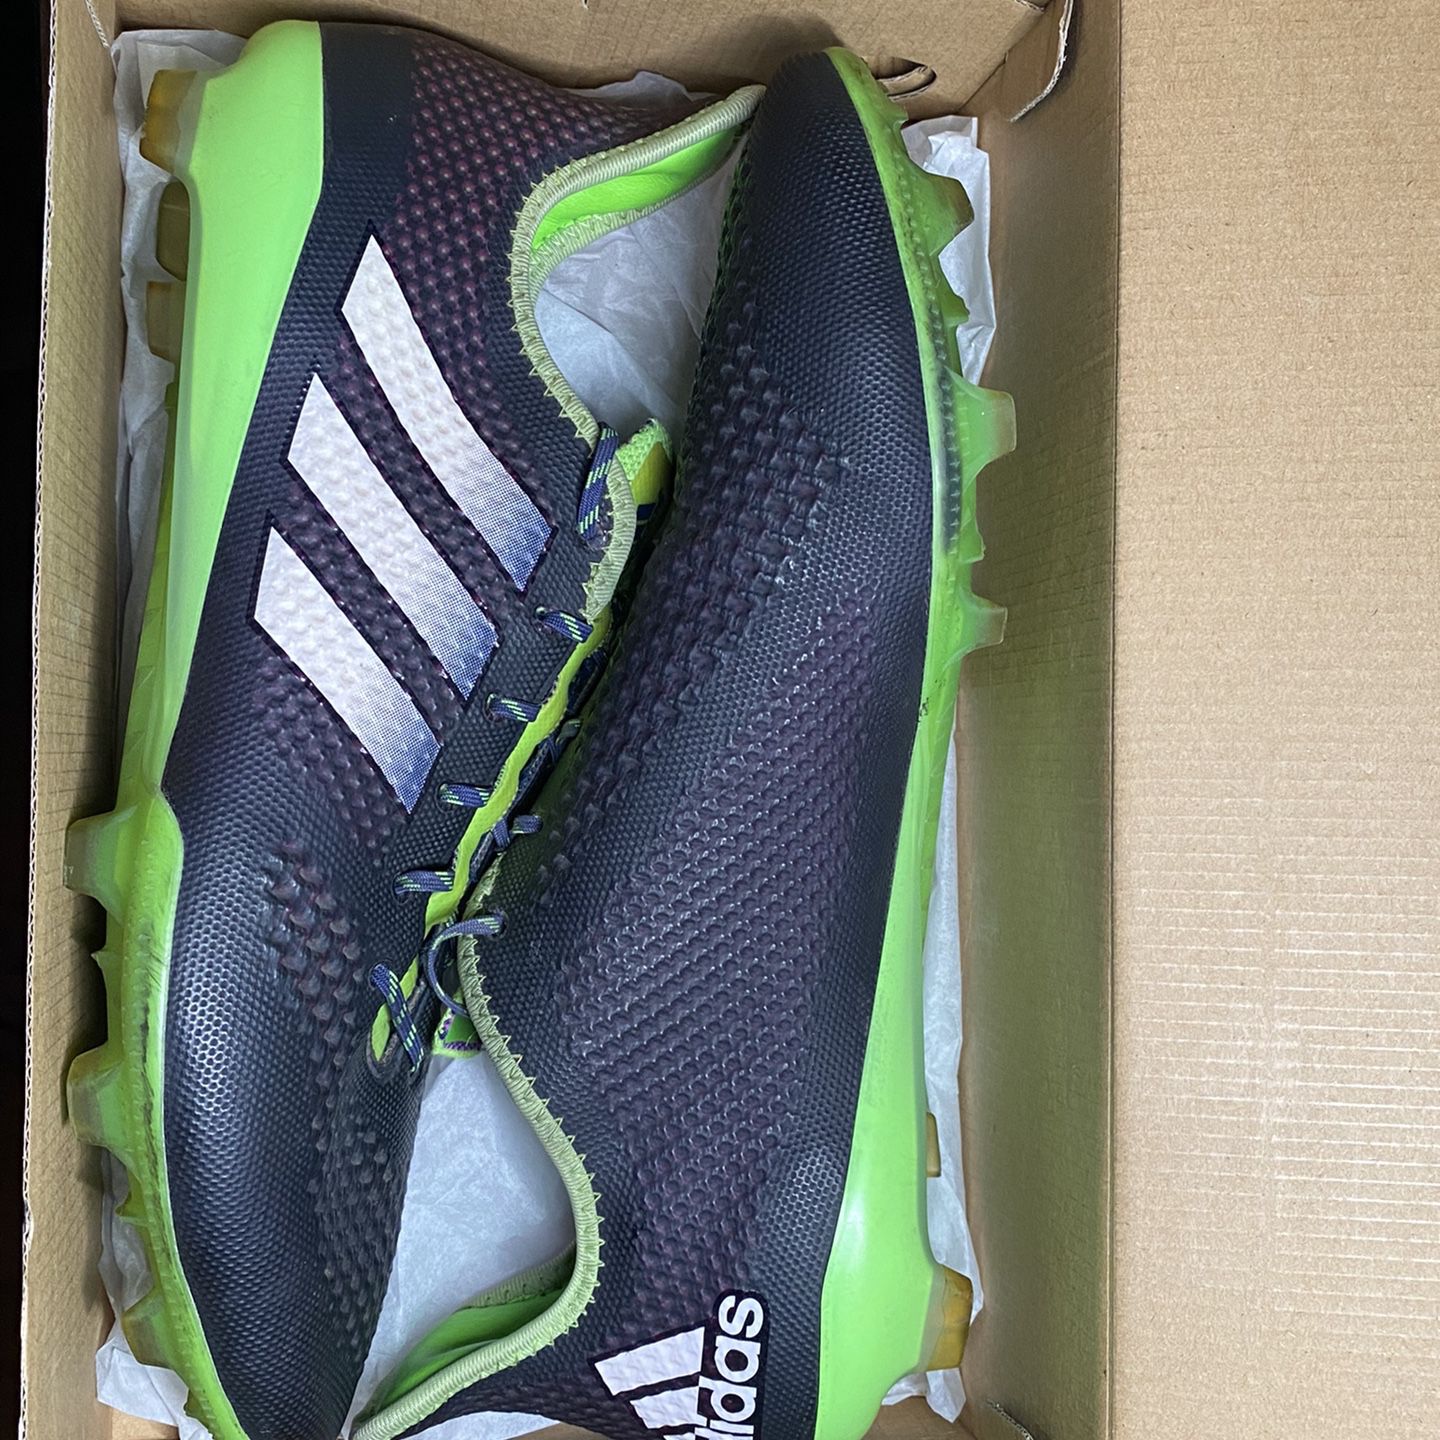 anfitriona parcialidad Interminable Adidas Primeknit 2.0 Fg for Sale in Pico Rivera, CA - OfferUp